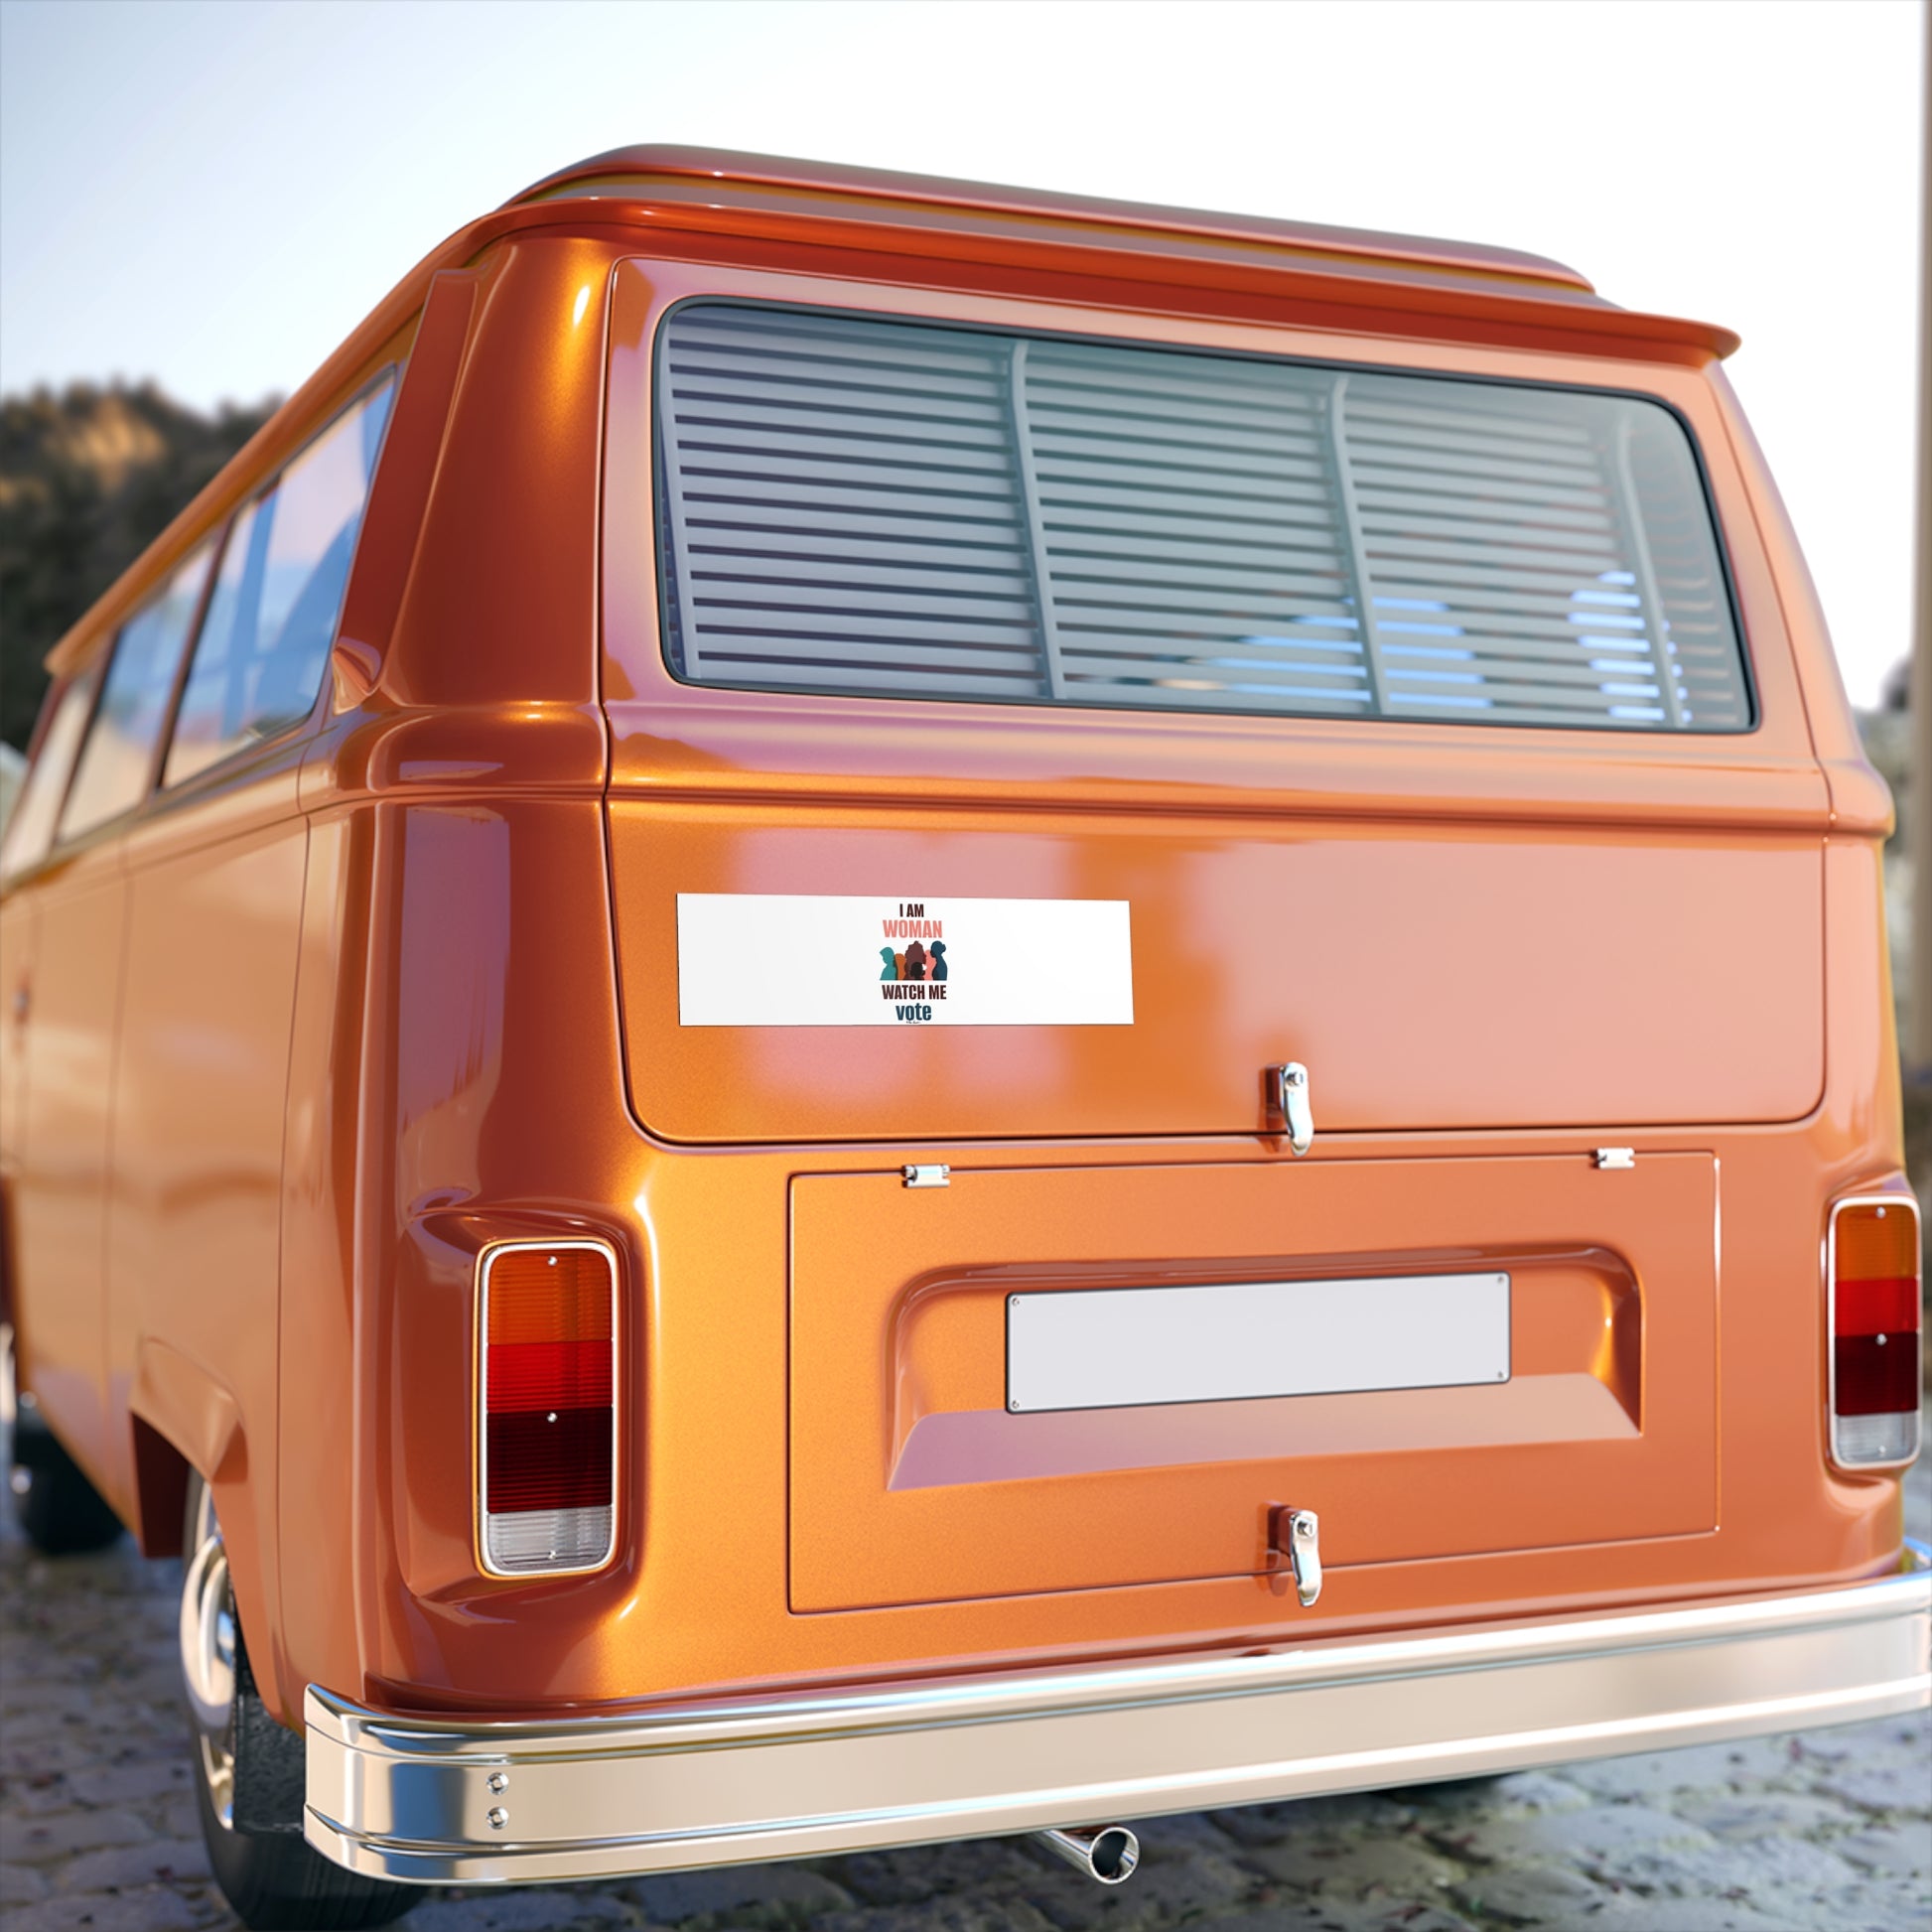 Rear view of a shiny orange vintage van with distinctive rounded edges, featuring Printify's premium water-resistant vinyl bumper stickers for voting women's rights, parked outdoors.